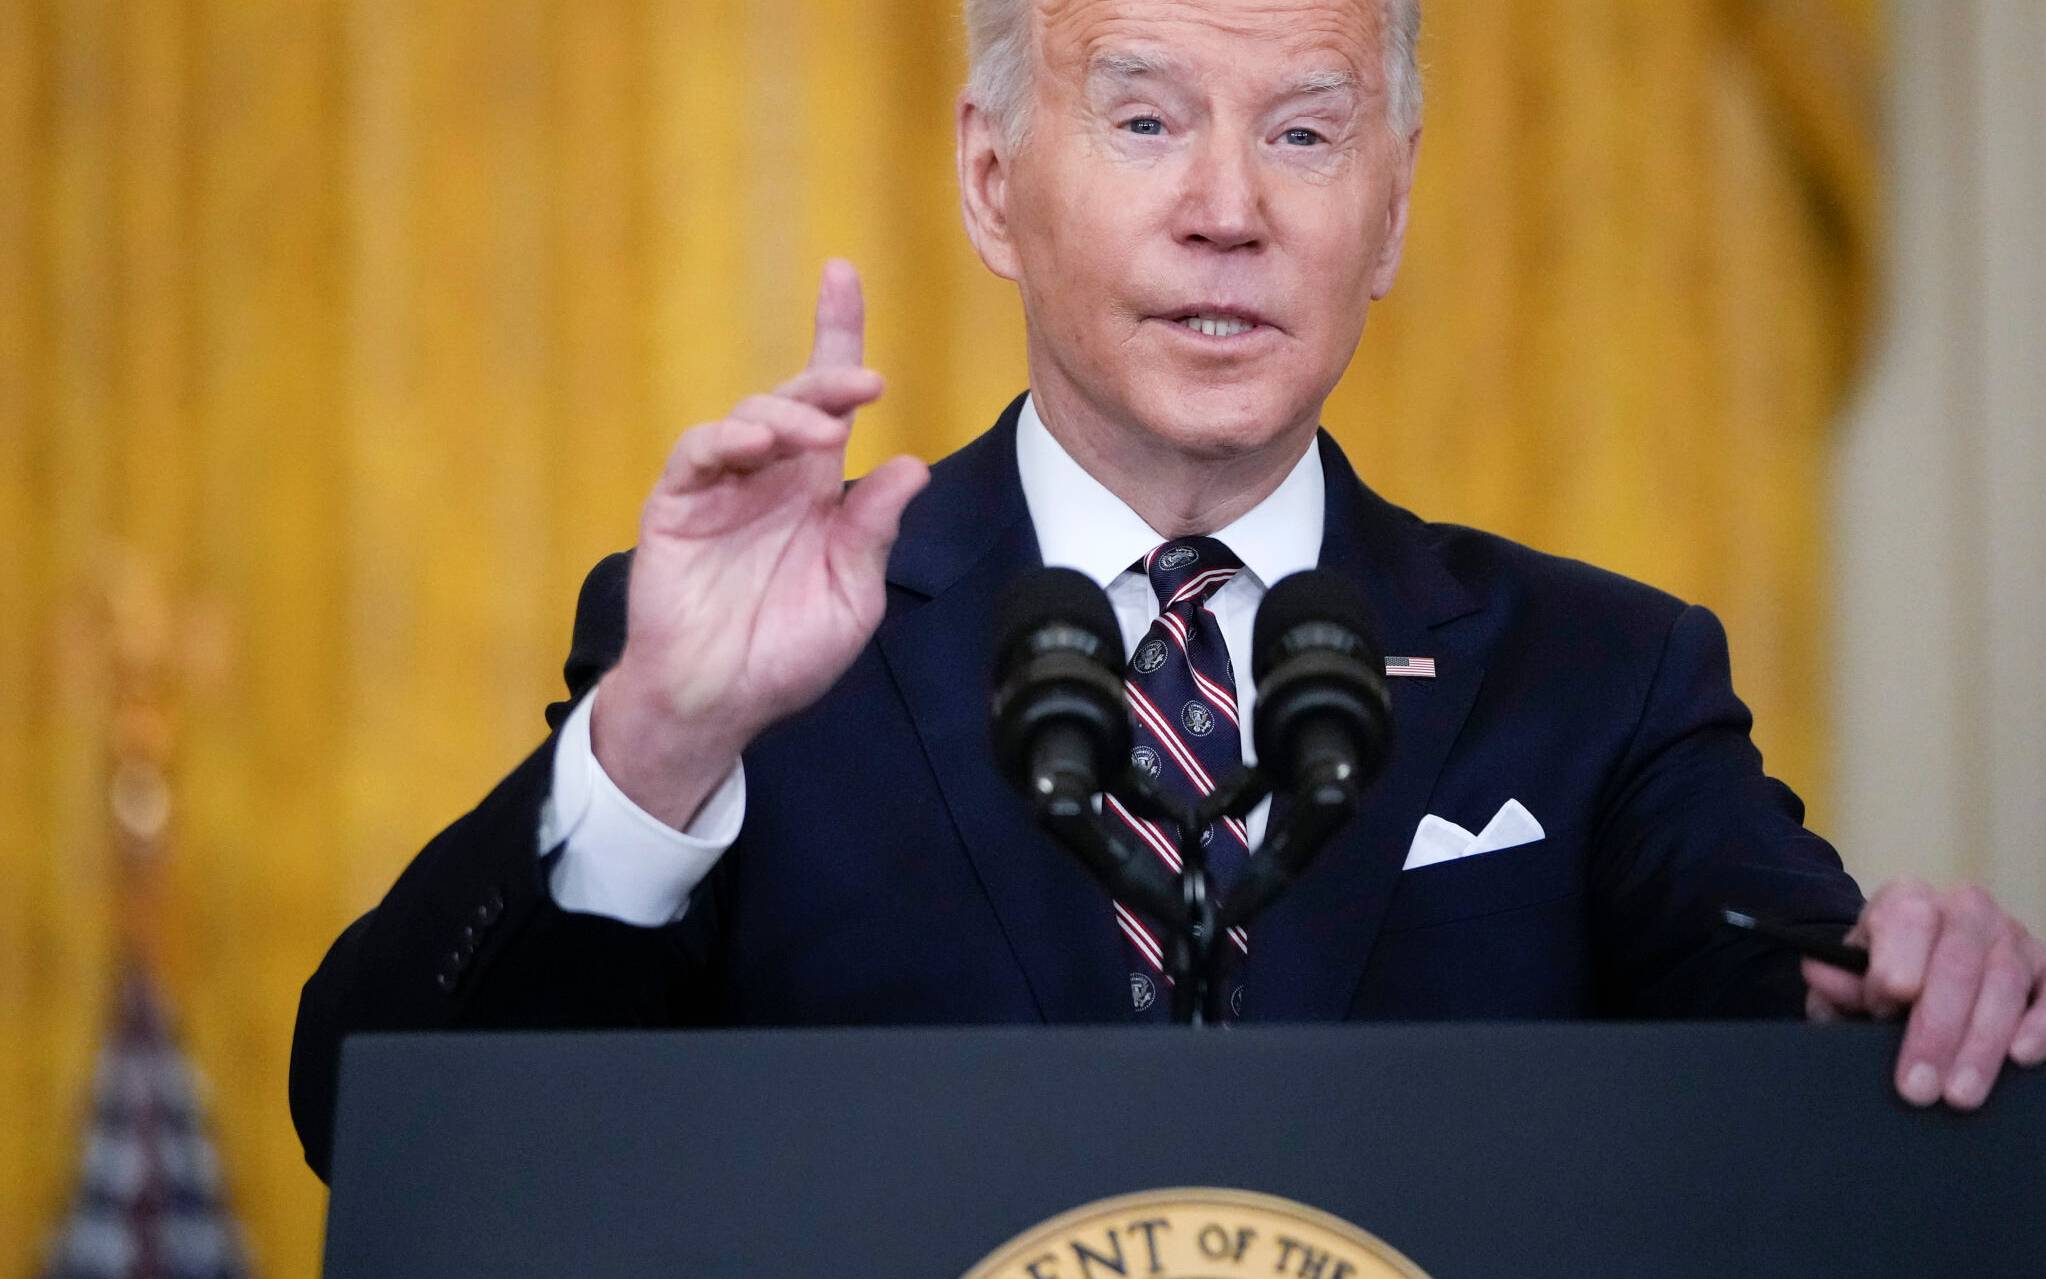 WASHINGTON, DC - FEBRUARY 22: U.S. President Joe Biden speaks on developments in Ukraine and Russia, and announces sanctions against Russia, from the East Room of the White House February 22, 2022 in Washington, DC. The White House earlier in the day called Russias deployment of troops into two pro-Russian separatist regions of Ukraine the beginnings of an invasion.   Drew Angerer/Getty Images/AFP (Photo by Drew Angerer / GETTY IMAGES NORTH AMERICA / Getty Images via AFP)